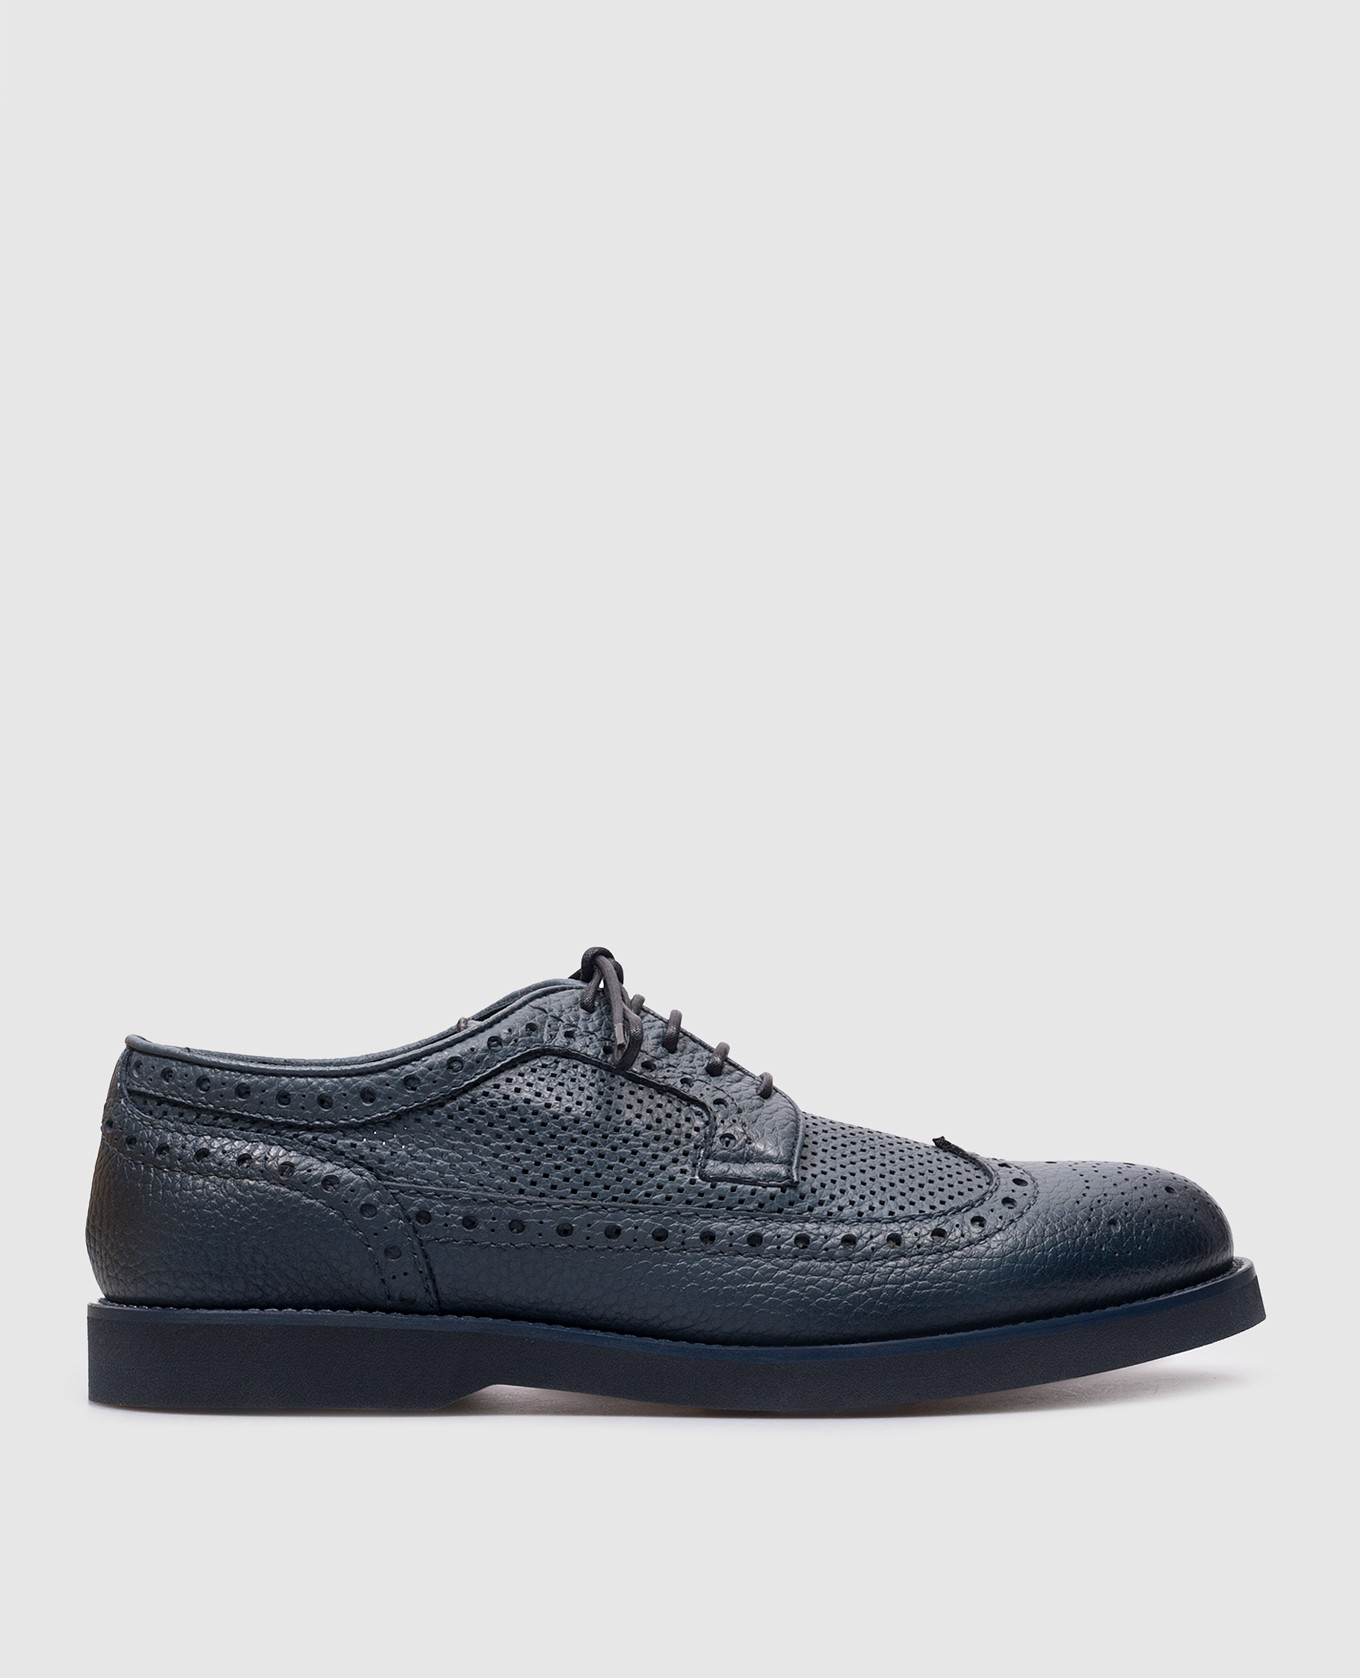 Blue leather brogues